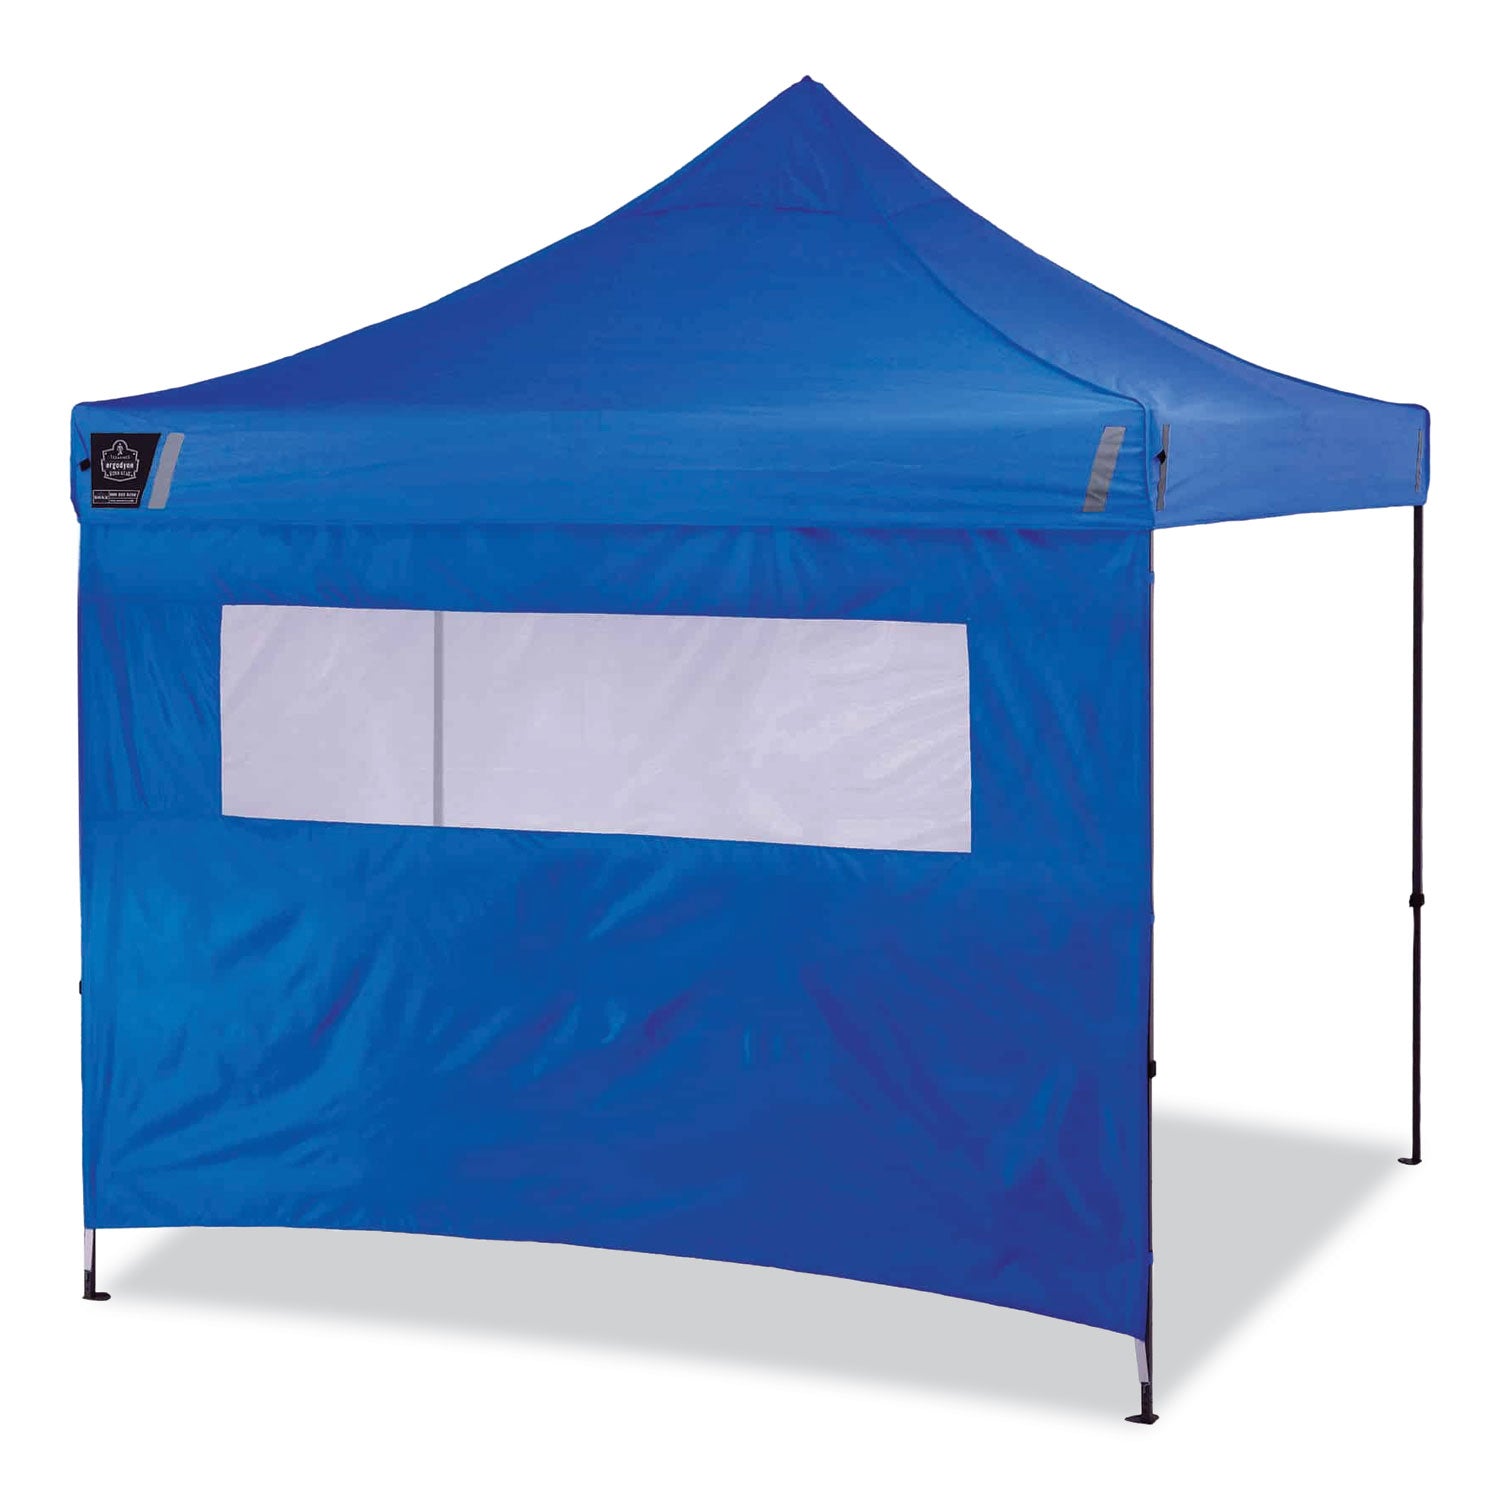 shax-6052-heavy-duty-tent-kit-+-mesh-windows-single-skin-10-ft-x-10-ft-polyester-steel-blue-ships-in-1-3-business-days_ego12982 - 7